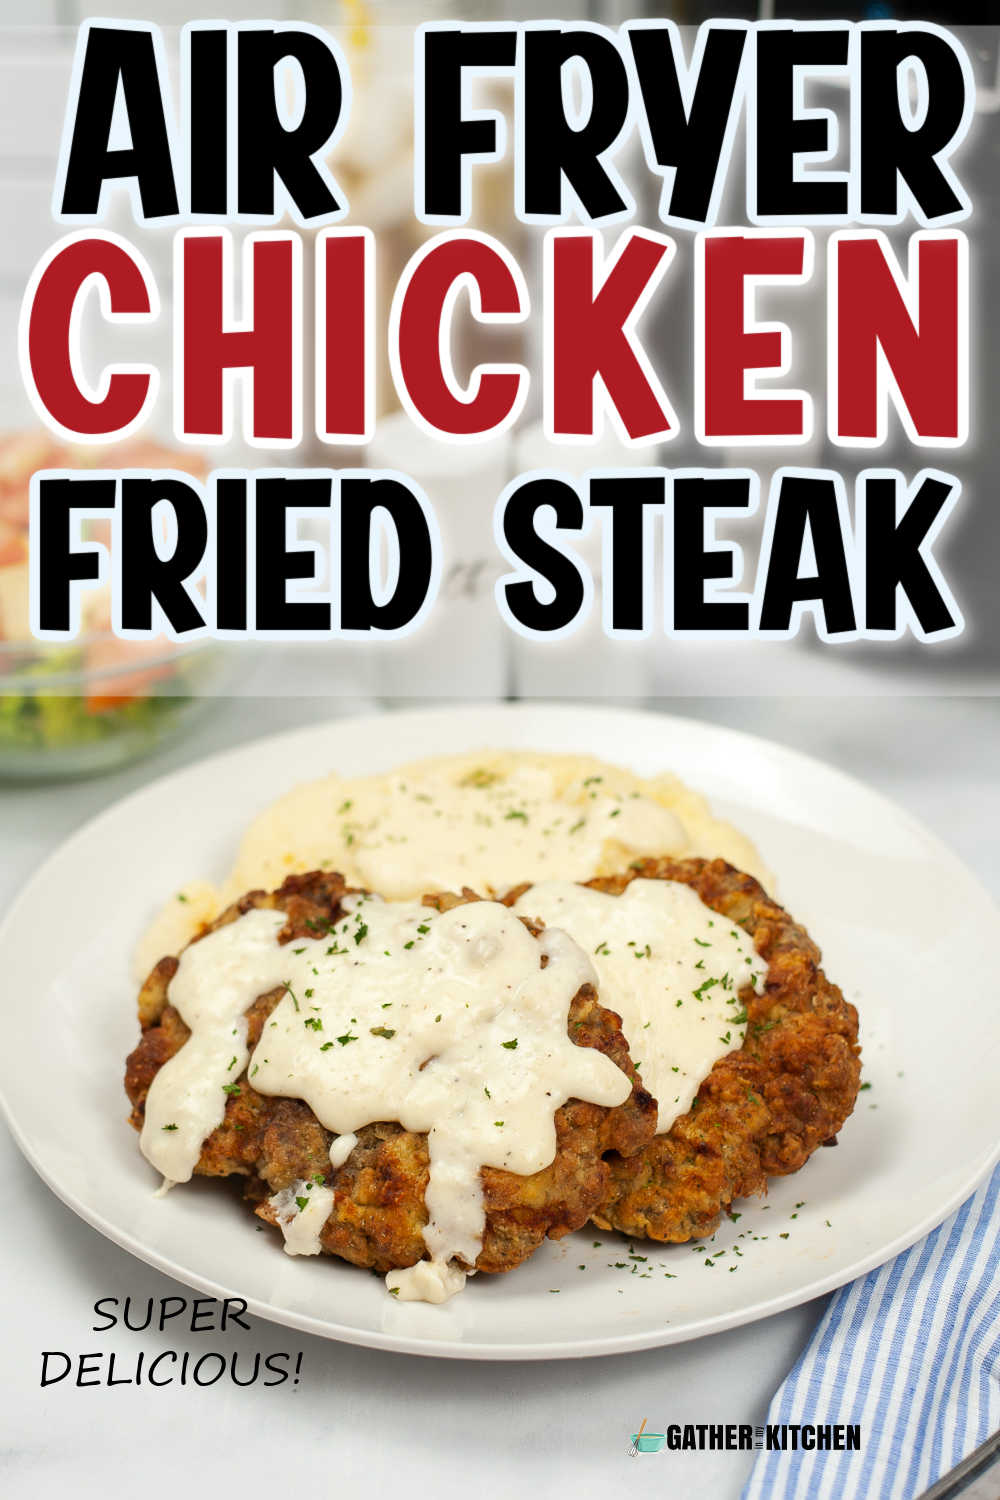 Pin image: chicken fried steak with gravy on a plate and "air fryer chicken fried steak" overlaid on top.